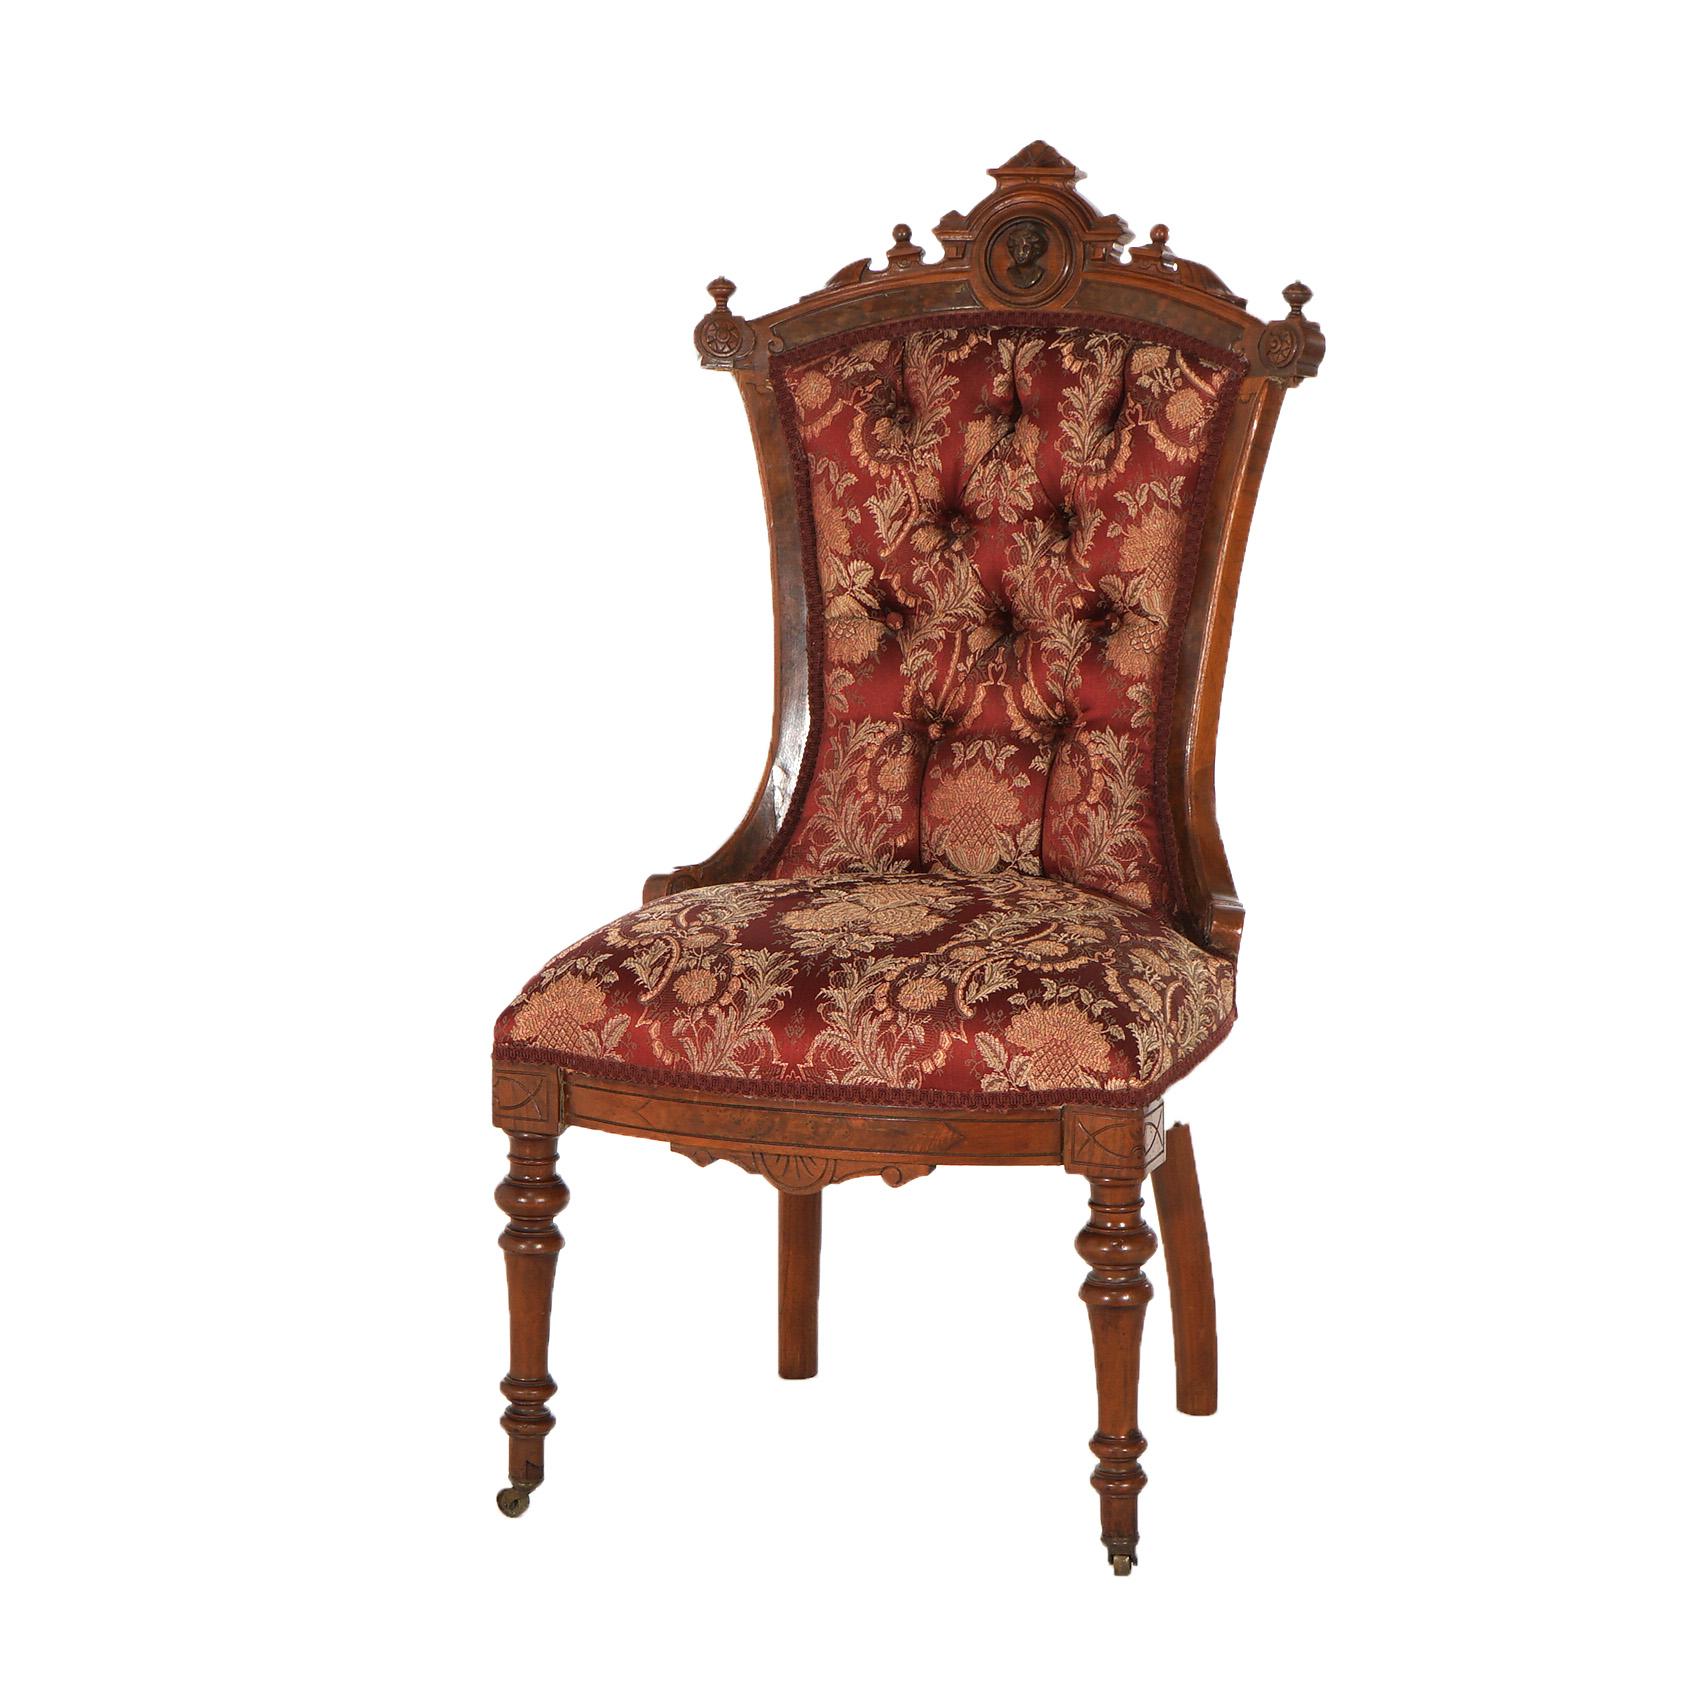 Antique John Jelliff Renaissance Revival Carved Walnut Side Chair C1880 In Good Condition For Sale In Big Flats, NY